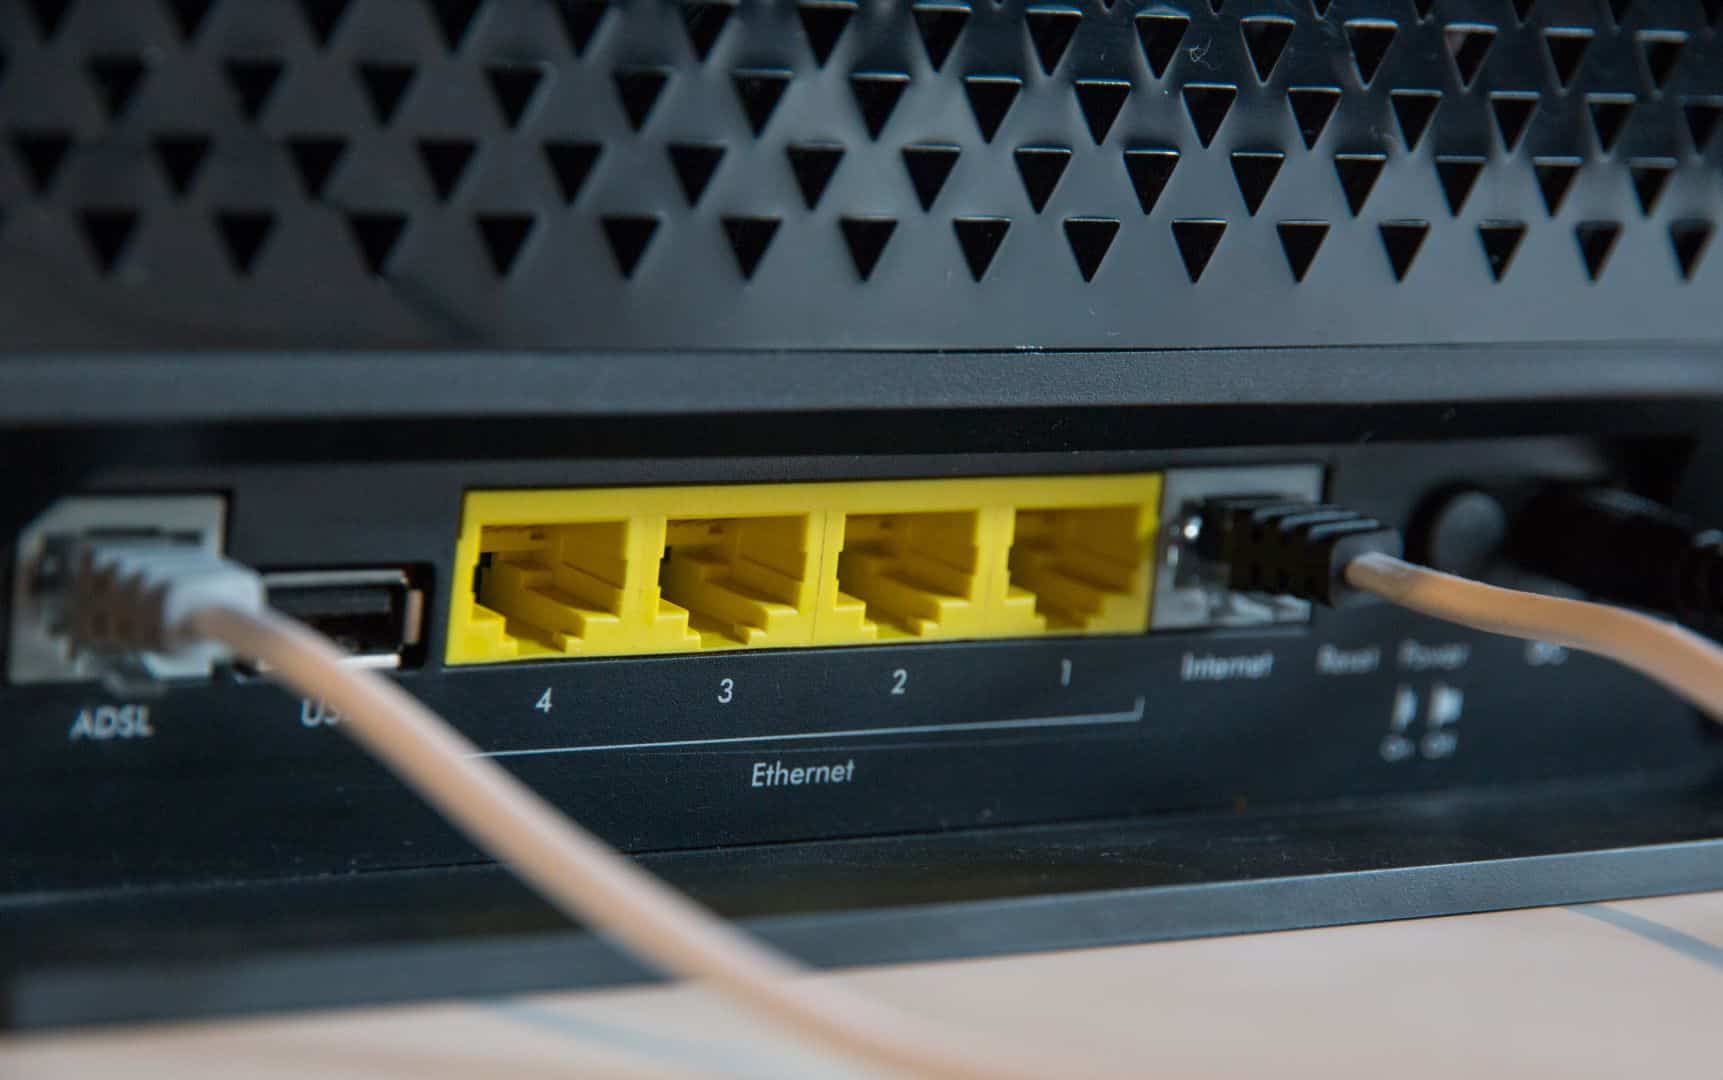 Ethernet ports on router